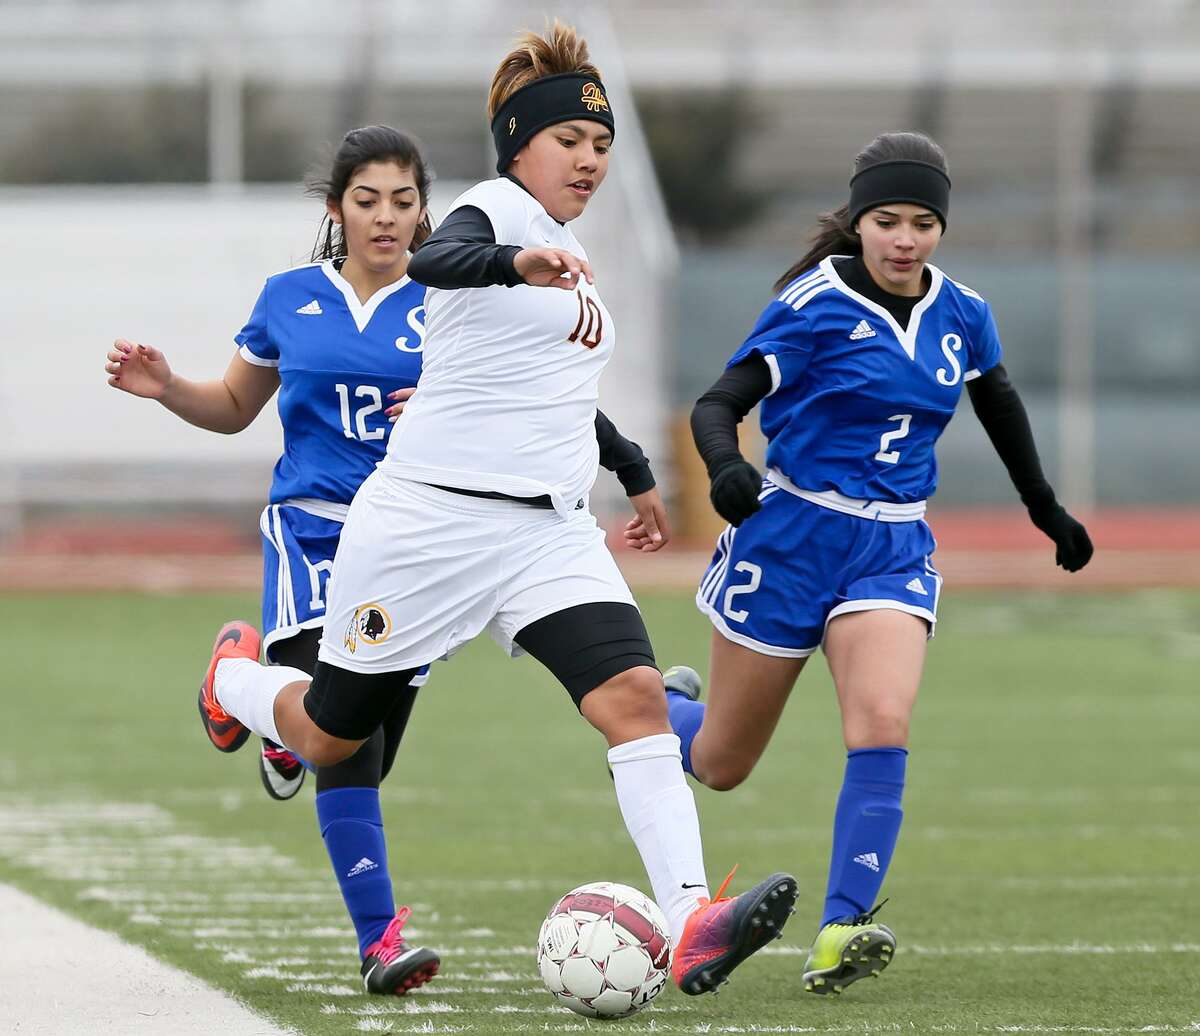 Harlandale's Jazmine Baltazar (center) drives the ball past Somerset's Larissa Galvez (left) and Valeria Munoa during their opening game in the Harlandale ISD Varsity Girls Soccer Showcase Tournament at Harlandale Memorial Stadium on Friday, Jan. 6, 2017. Baltazar scored four goals to lead the Lady Indians past Somerset 9-0. MARVIN PFEIFFER/ mpfeiffer@express-news.net